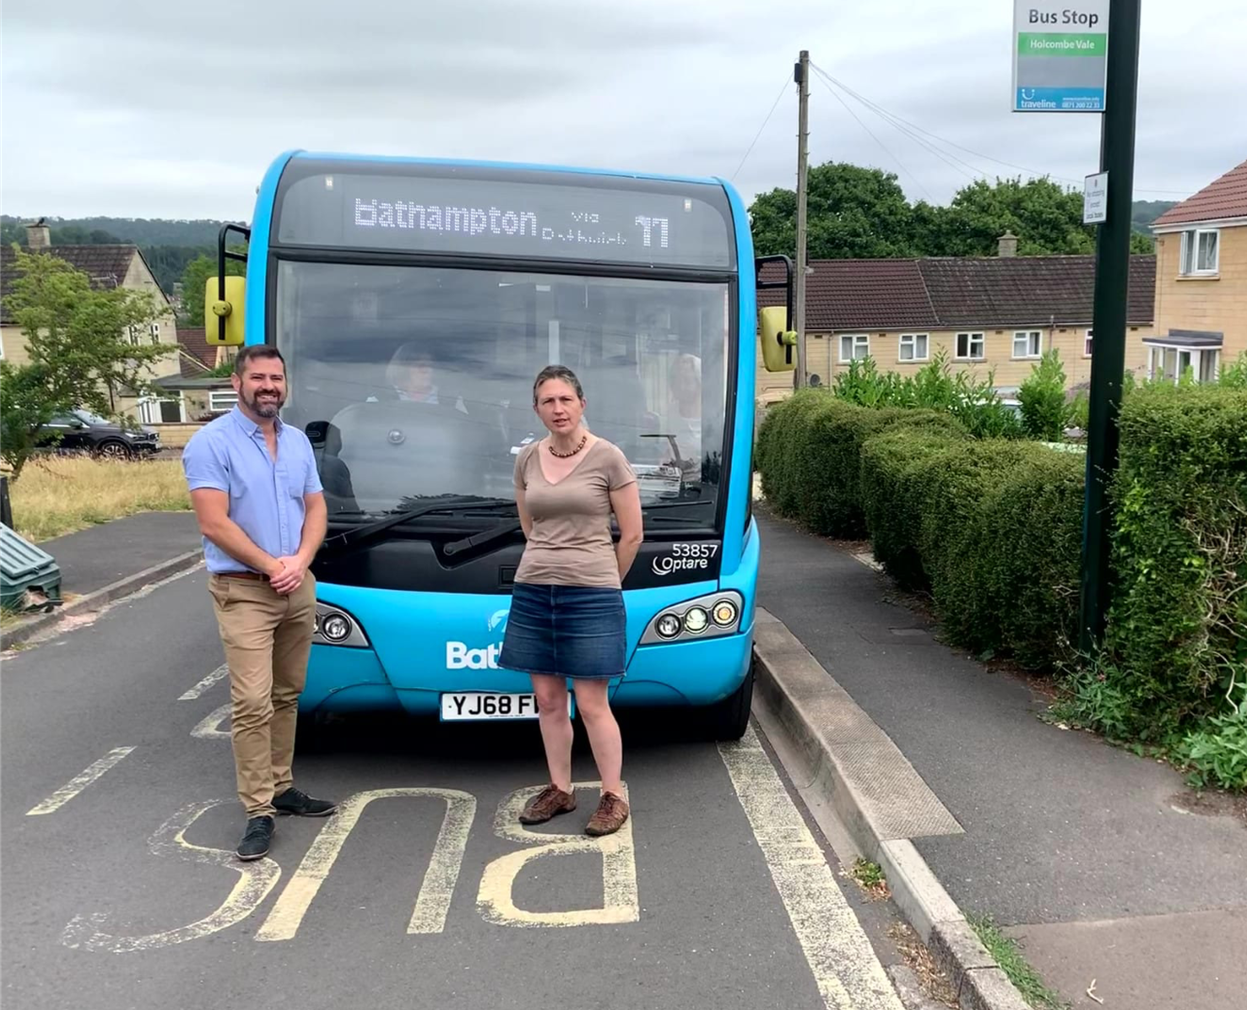 Councillor Kevin Guy (on the left) and Councillor Sarah Warren (on the right) next to a blue bus